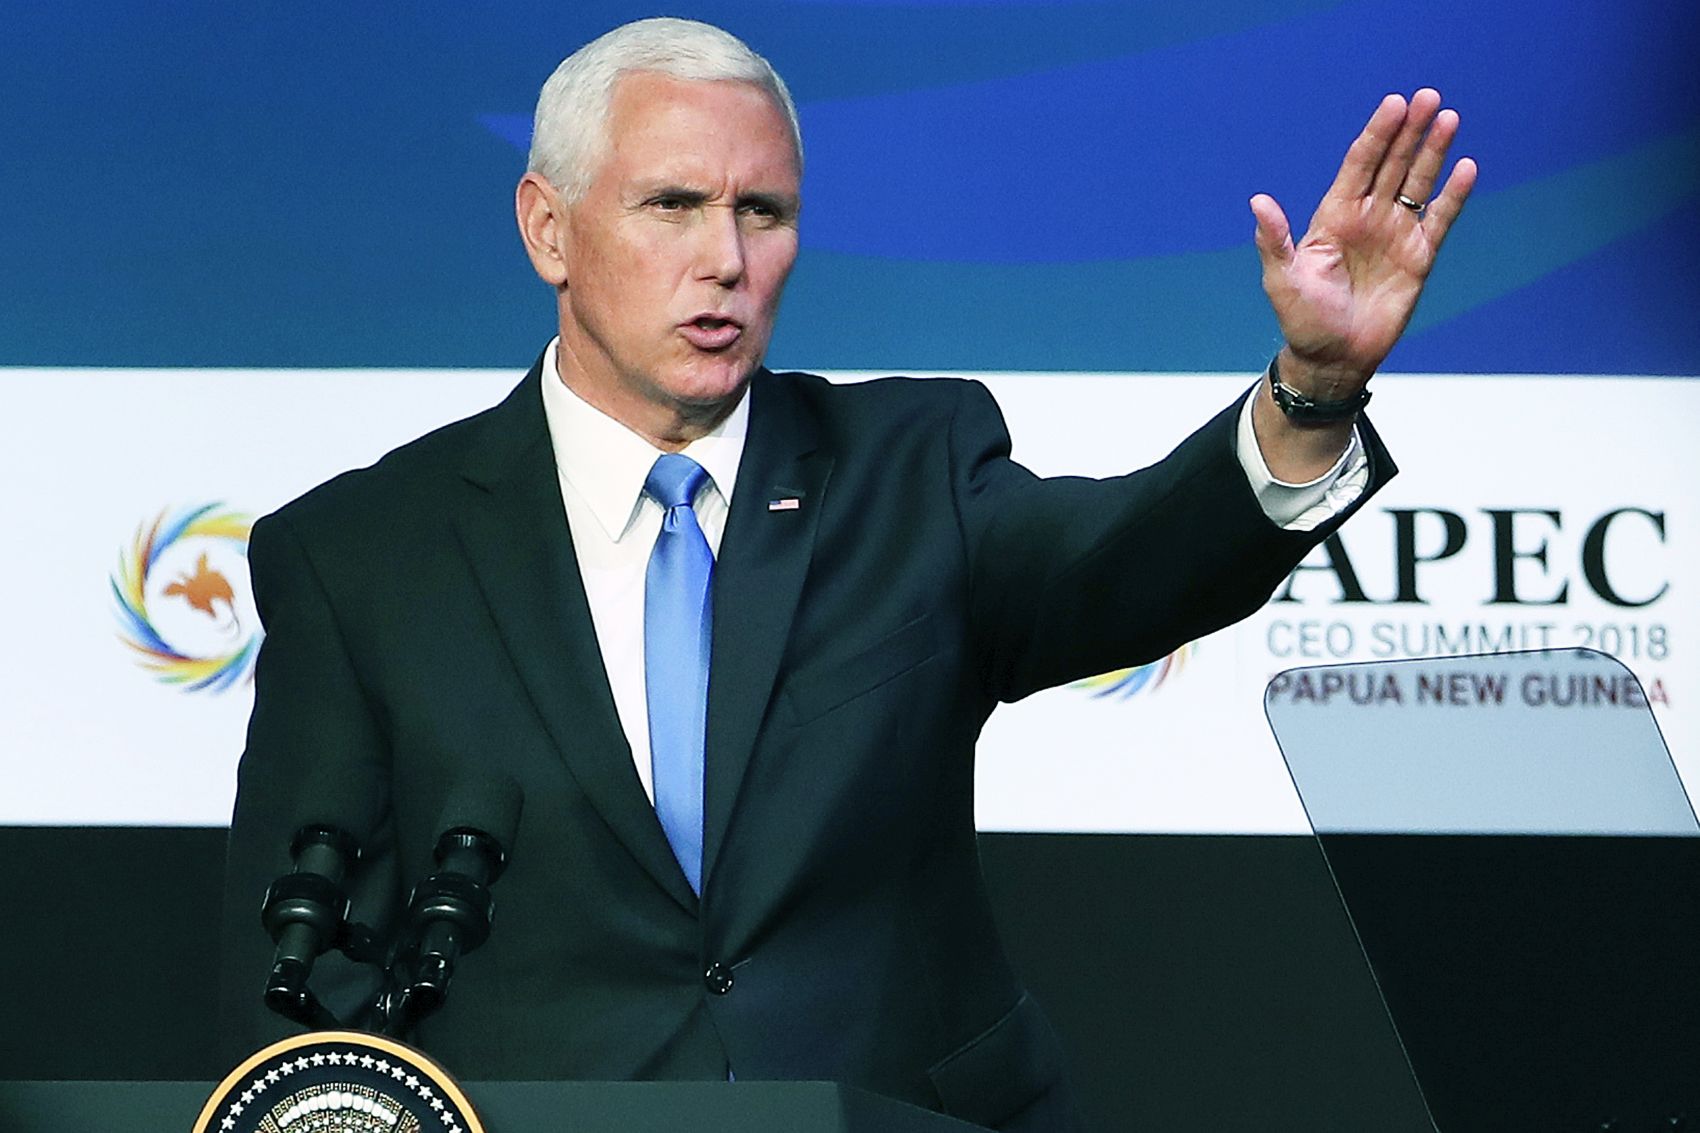 Can Shinzo Abe Bring U.S. Vice President Pence Over on TPP?